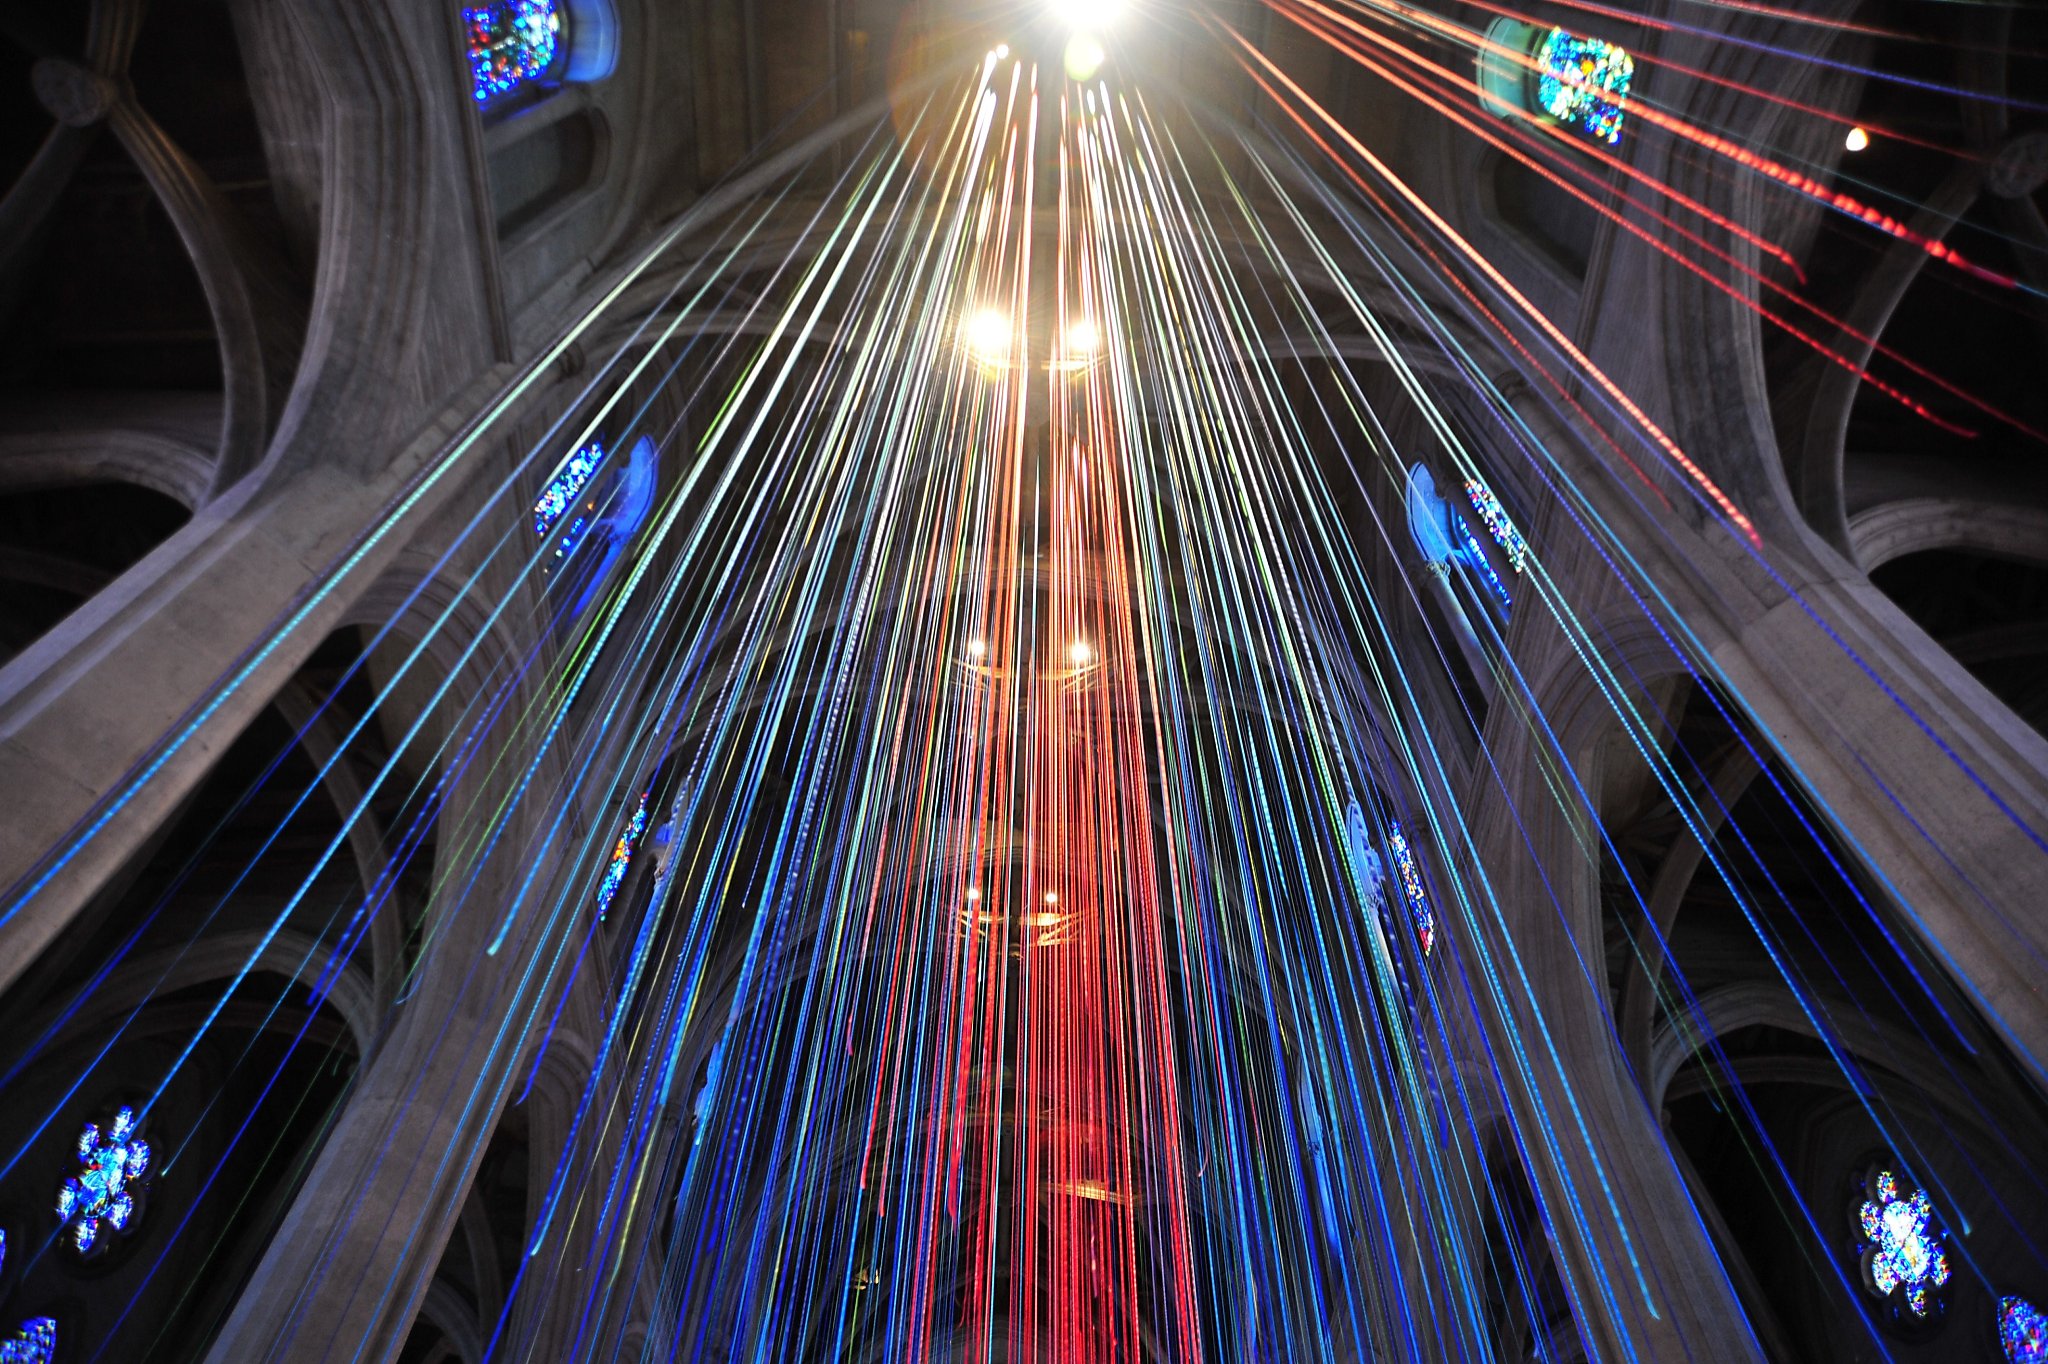 'Graced With Light' art installation has 20 miles of ribbons - SFGate